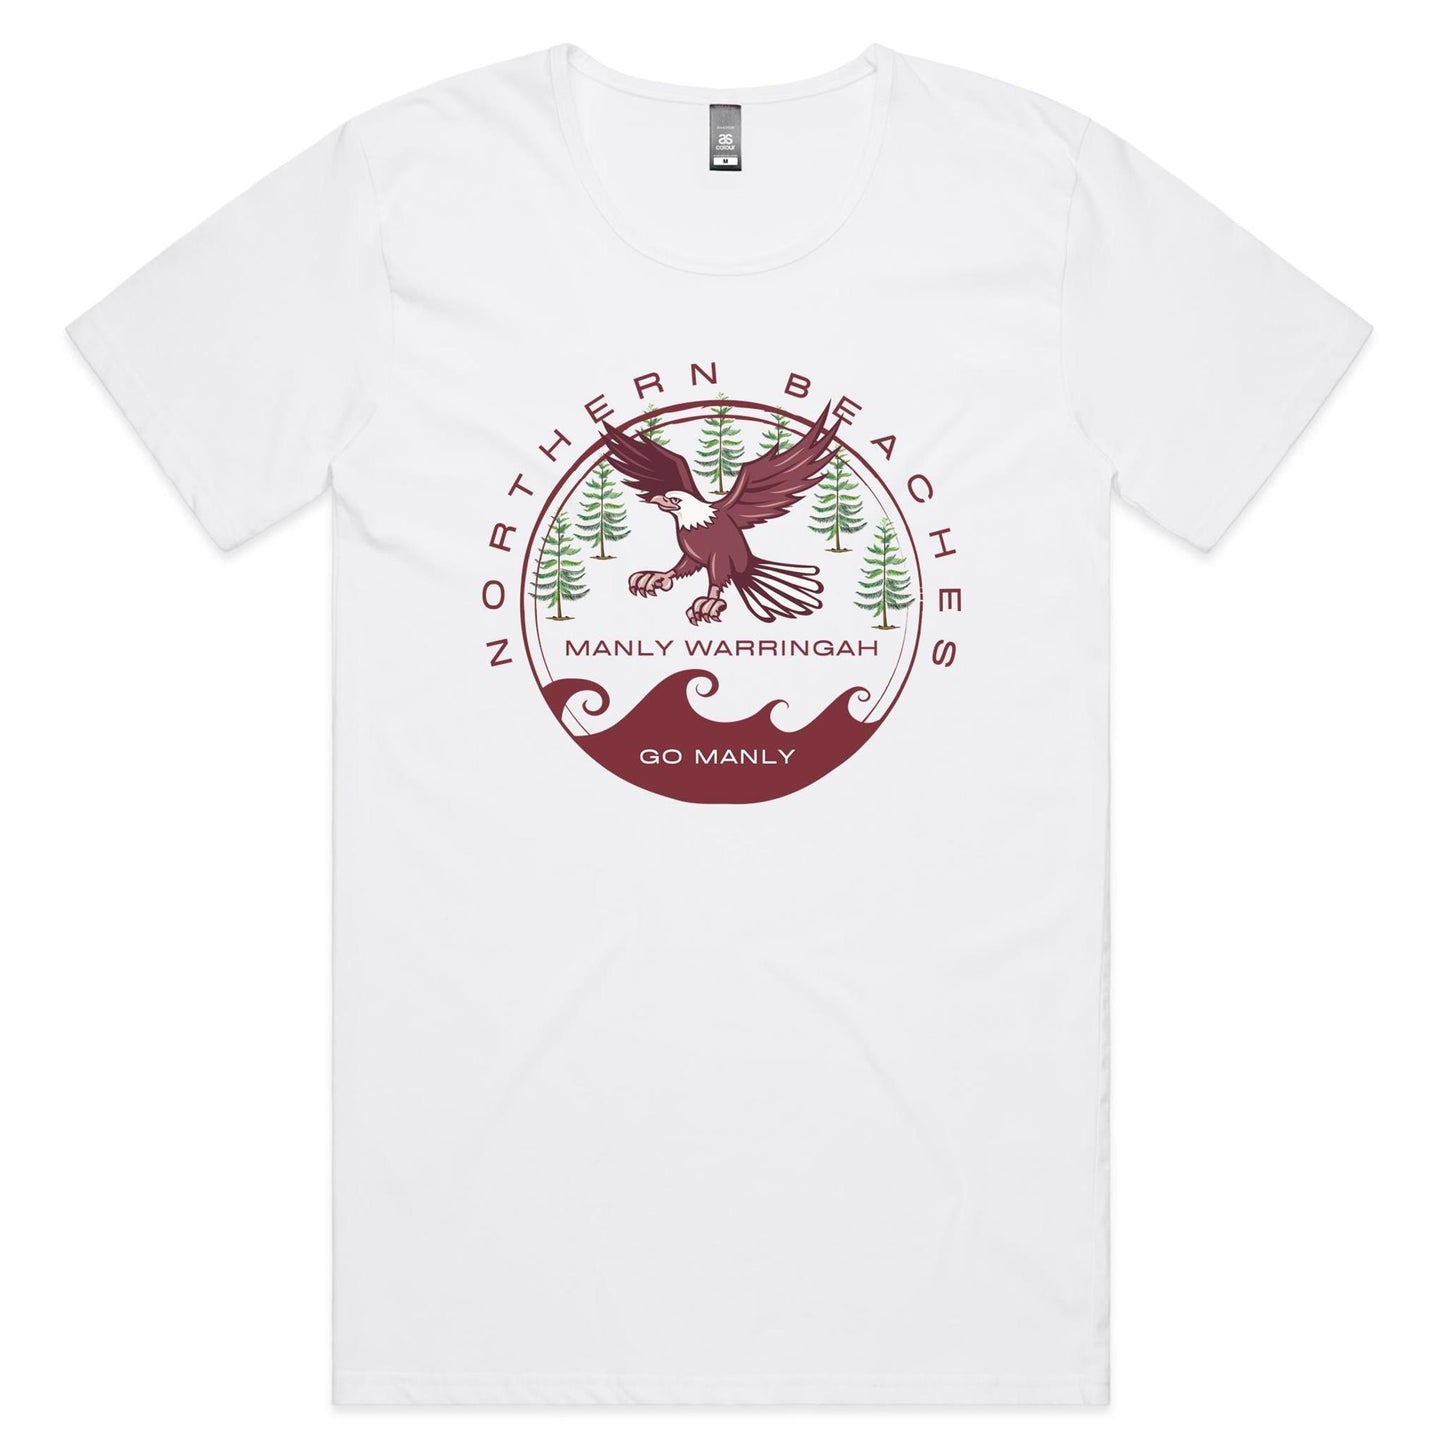 Classic Cotton Tee Northern Beaches logo design - Lost Manly Shop